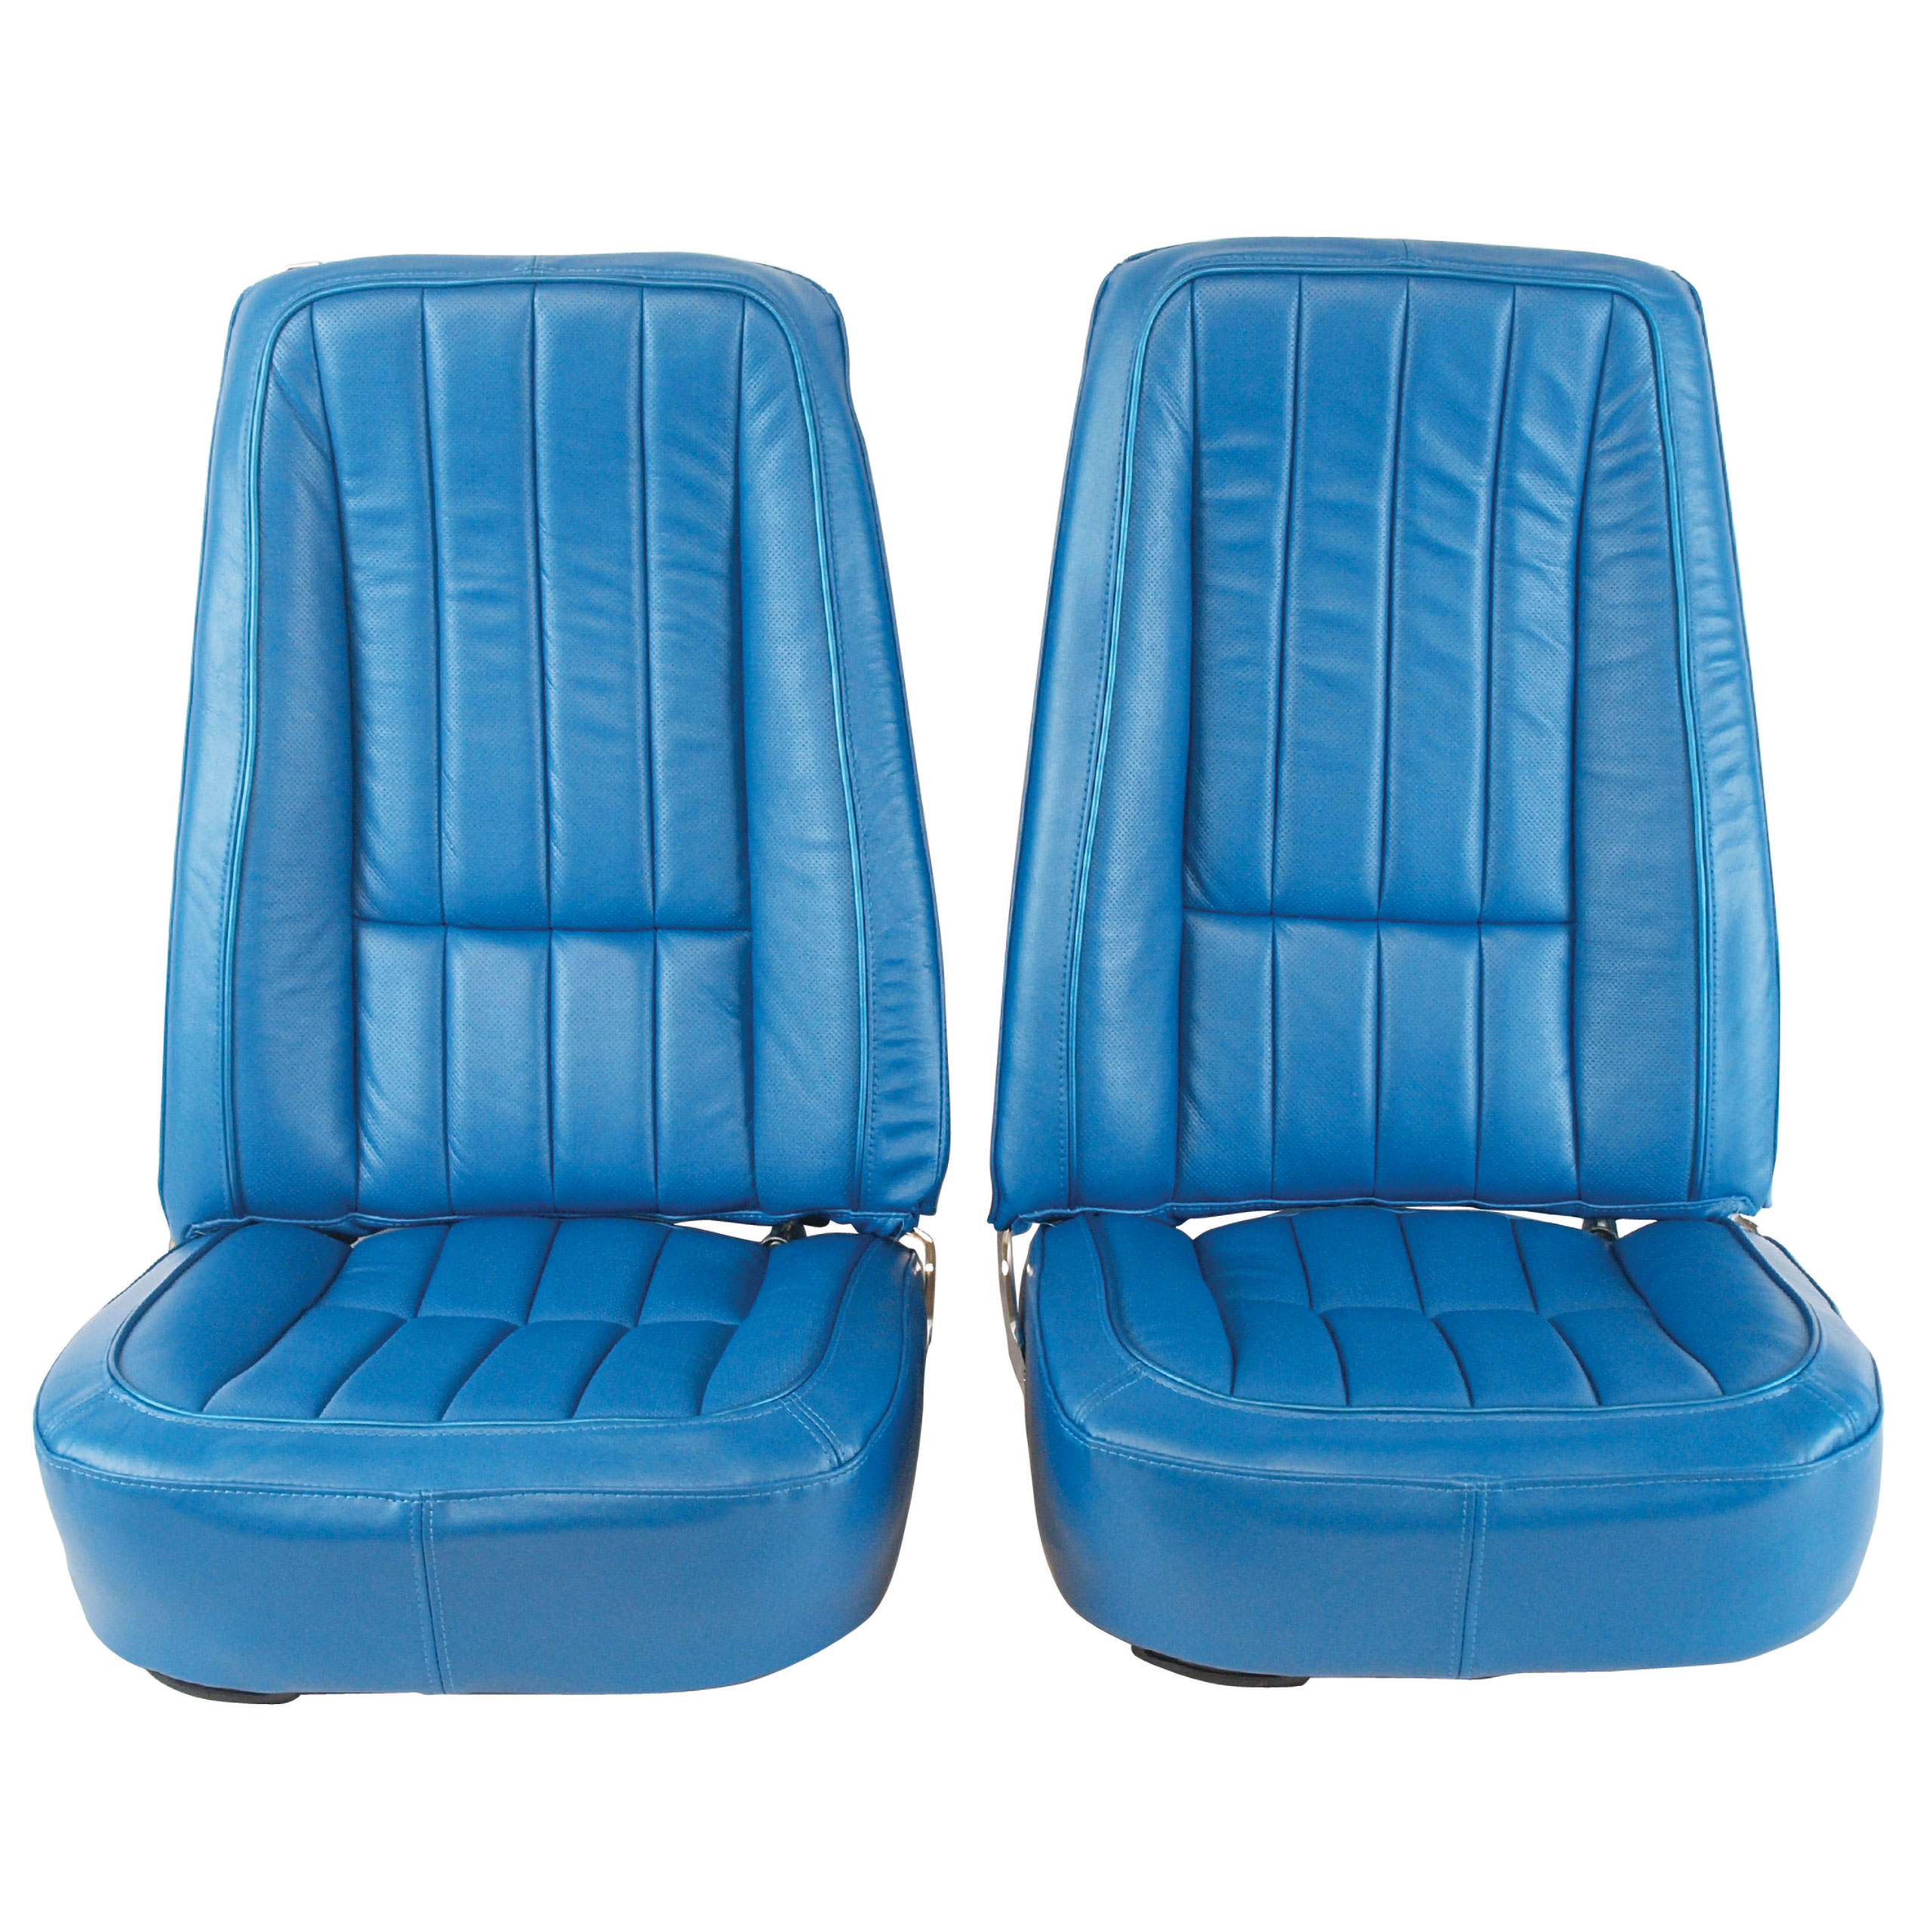 1968 C3 Corvette Mounted Seats Bright Blue 100% Leather First Design Without Headrest Bracket